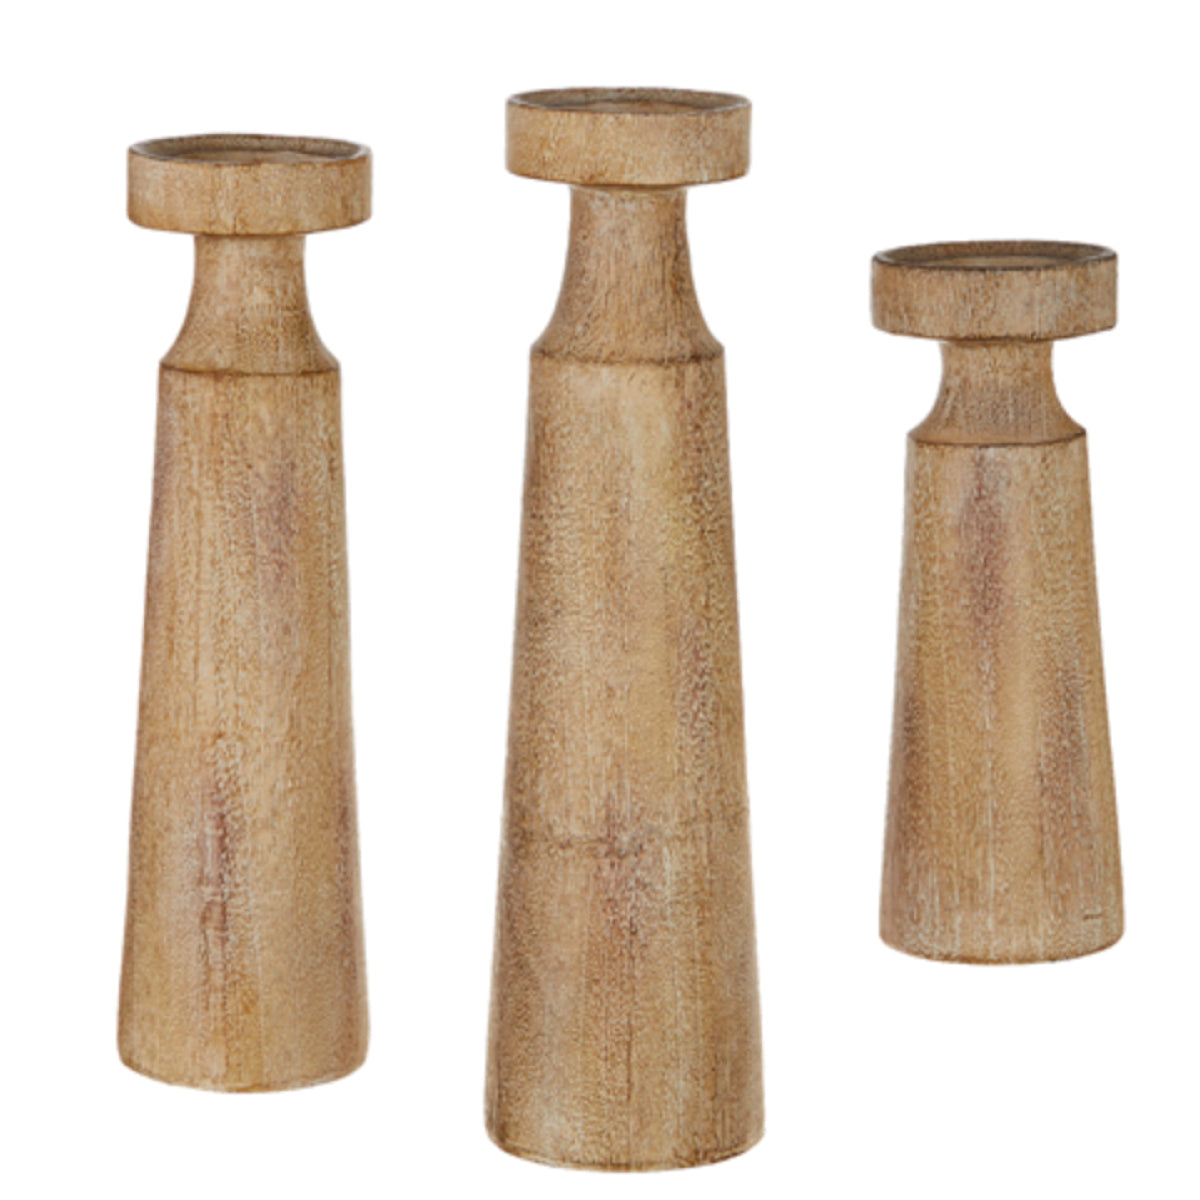 Wooden Candle Holders | set of 3